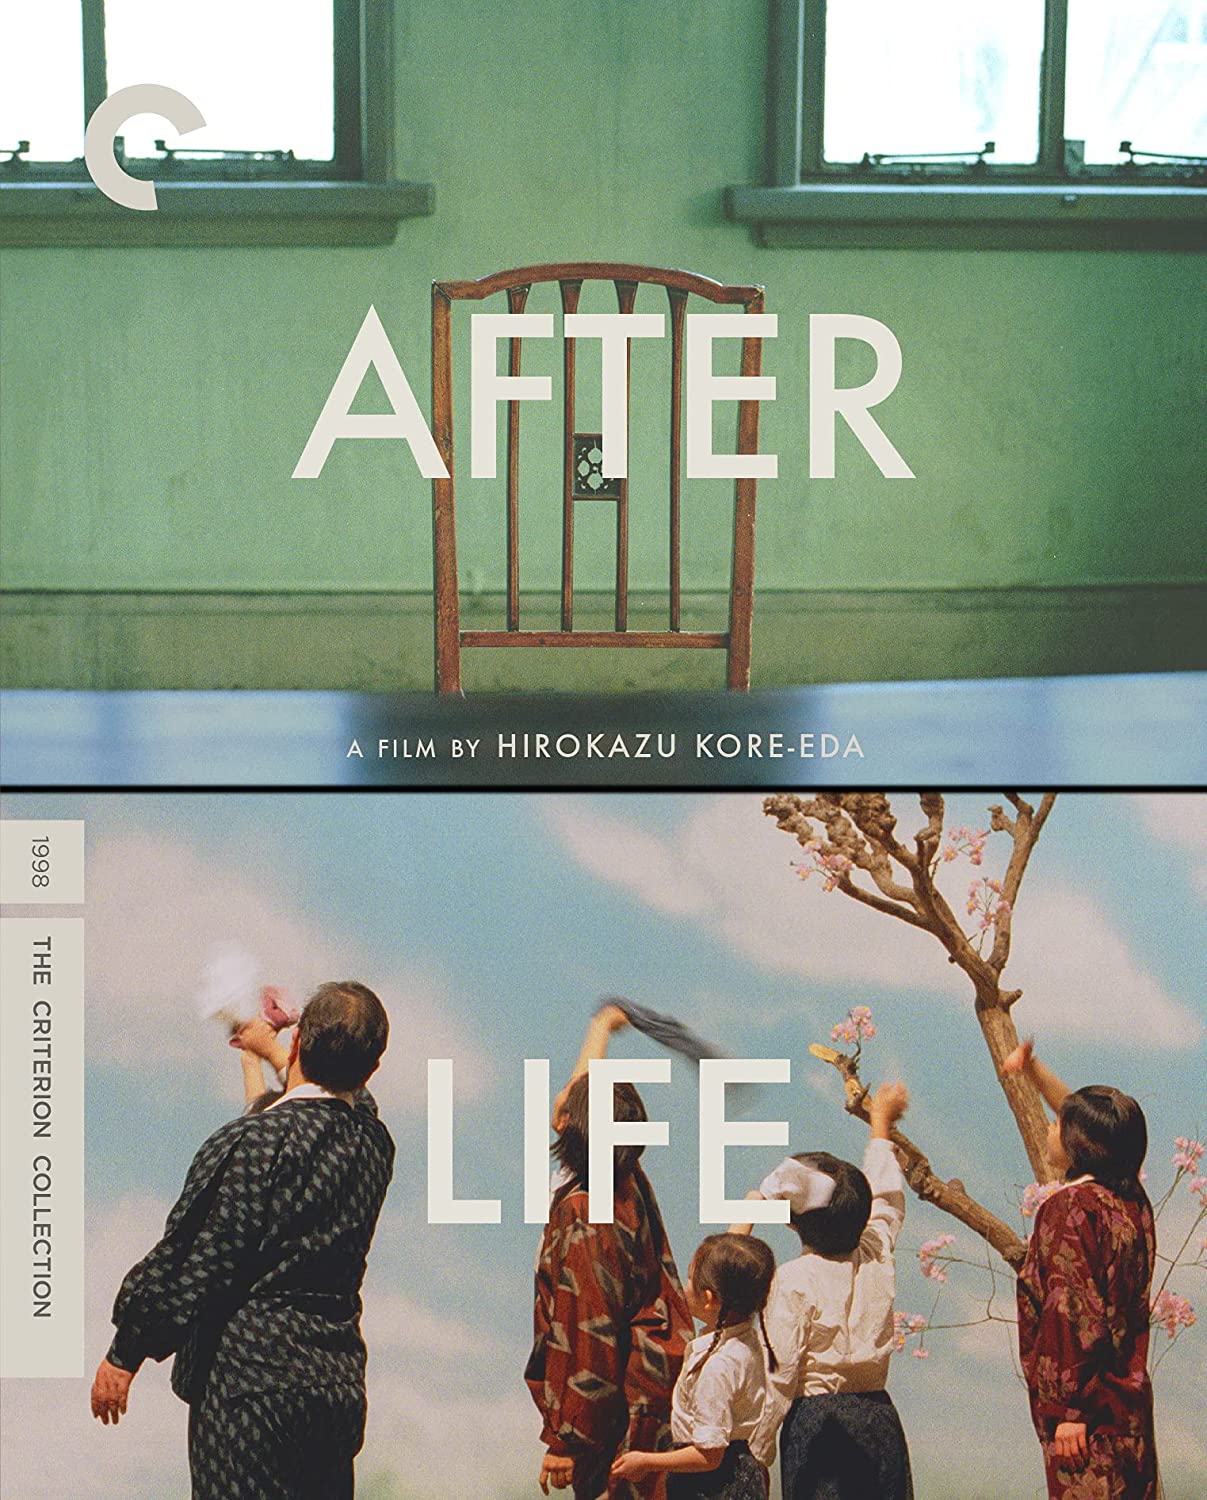 After Life [Criterion Collection] [Blu-ray] cover art